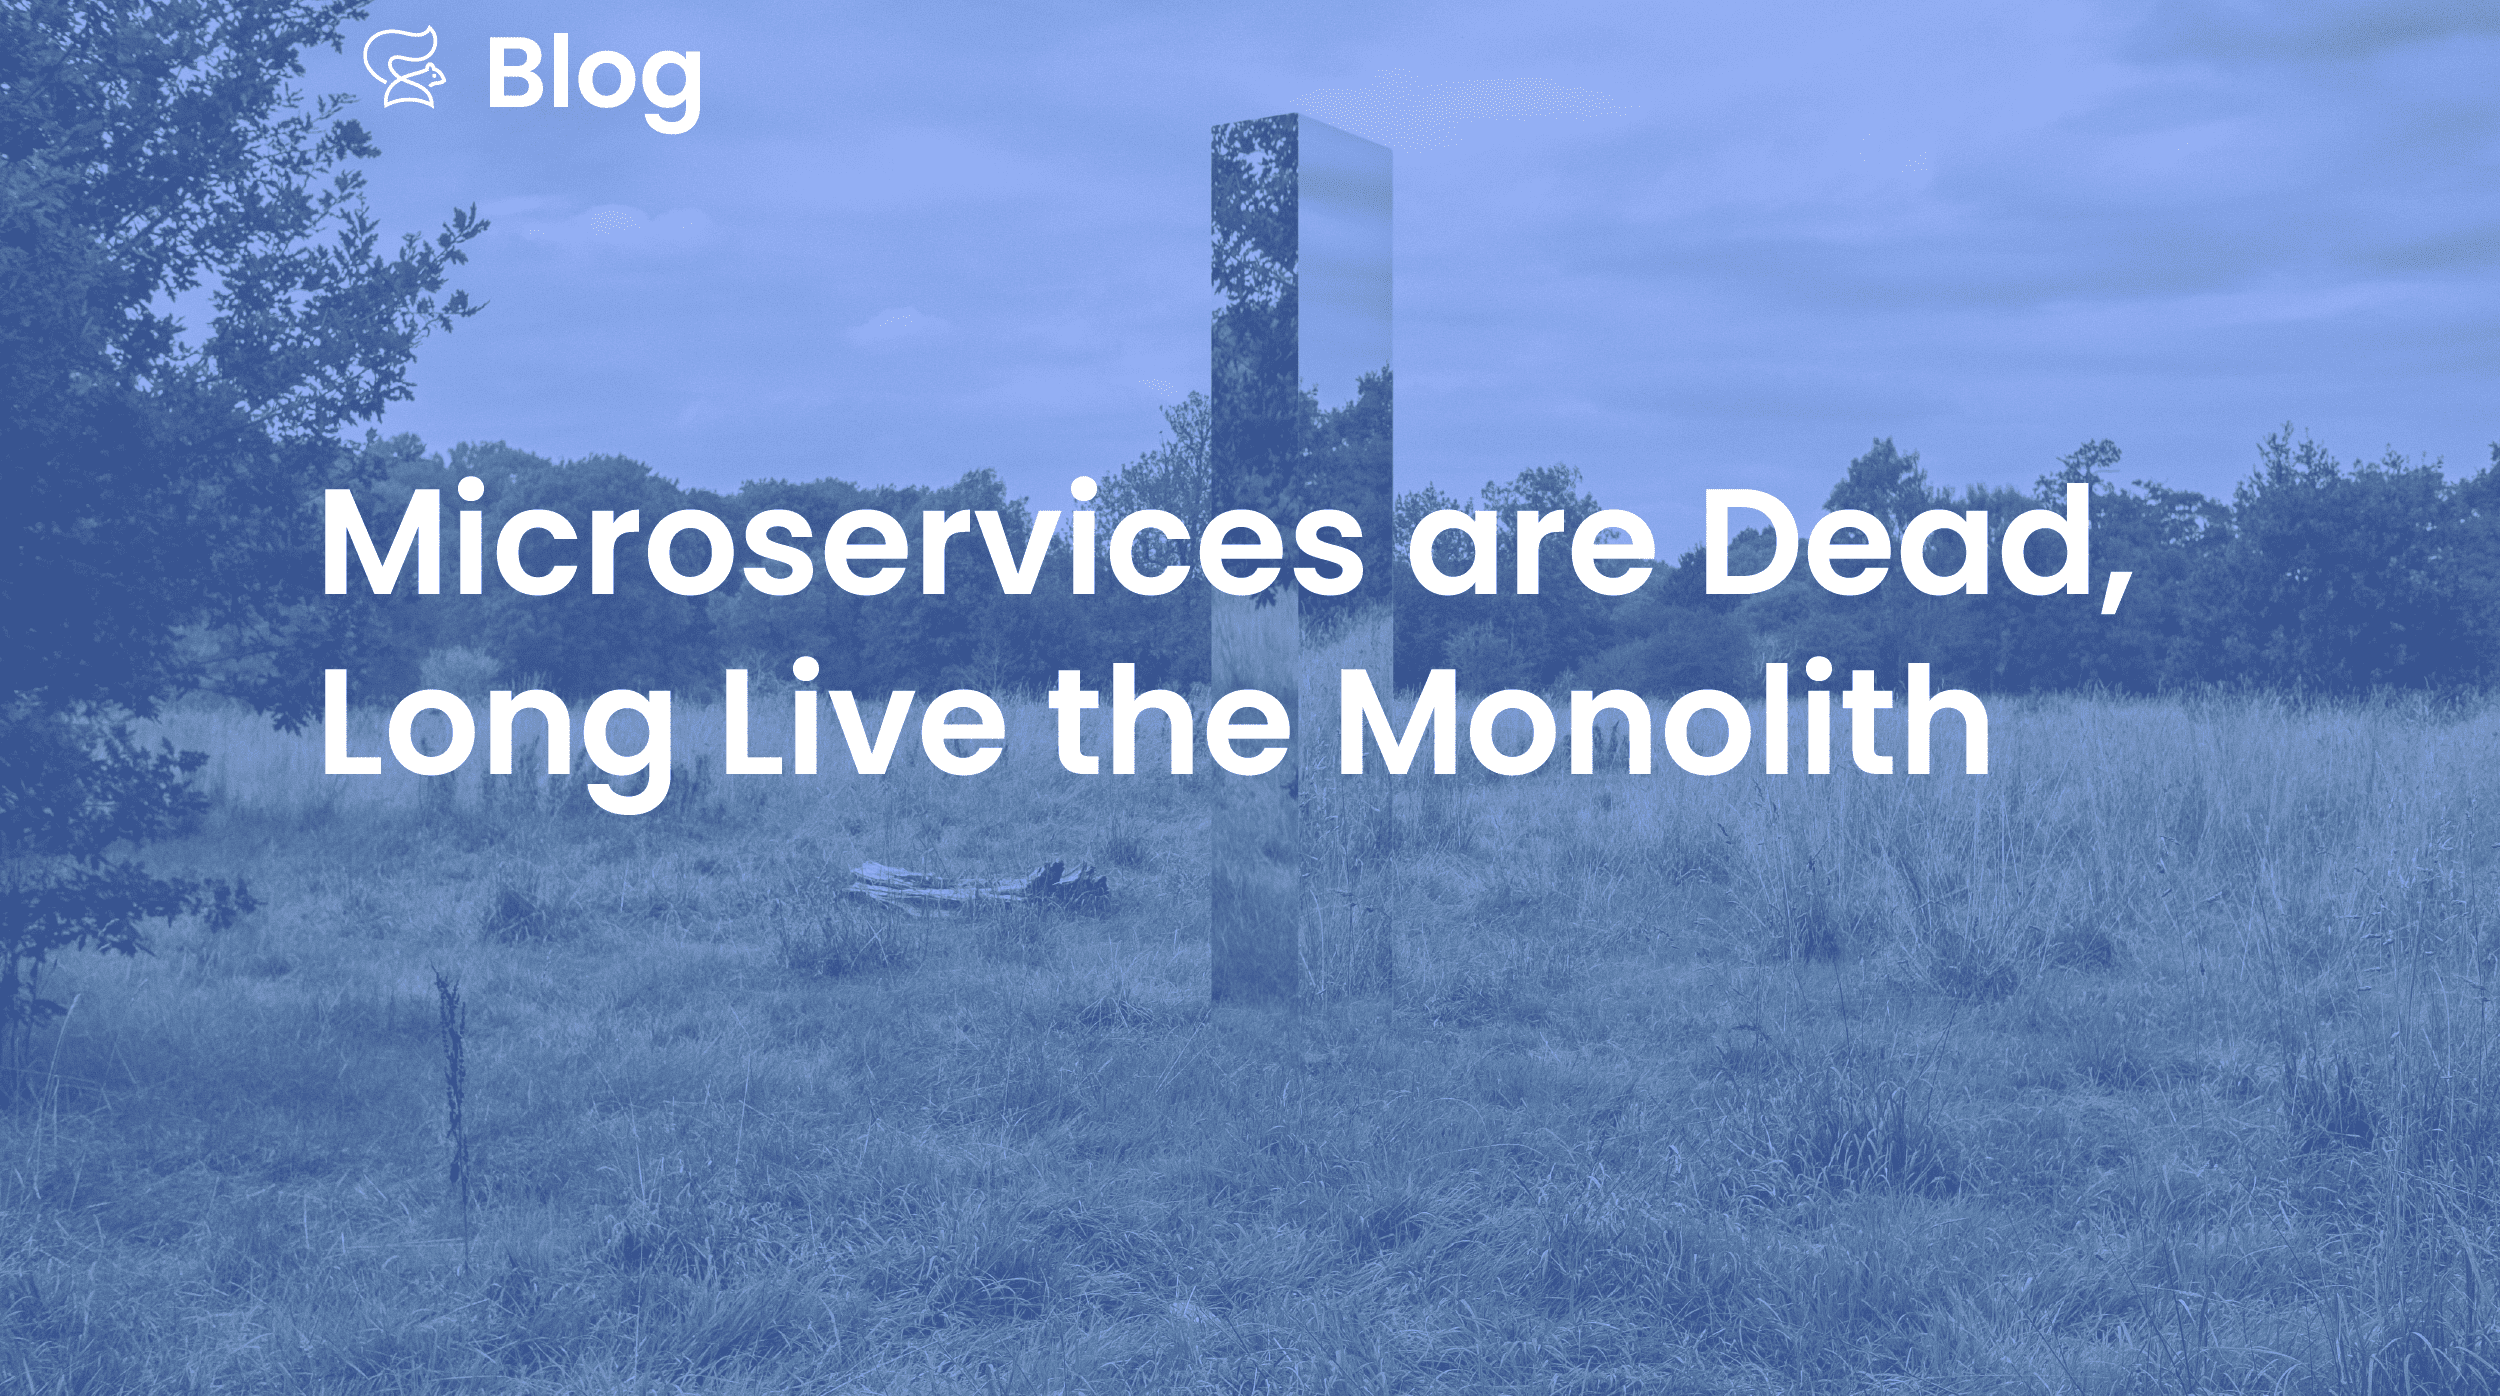 Microservices are Dead, Long Live the Monolith